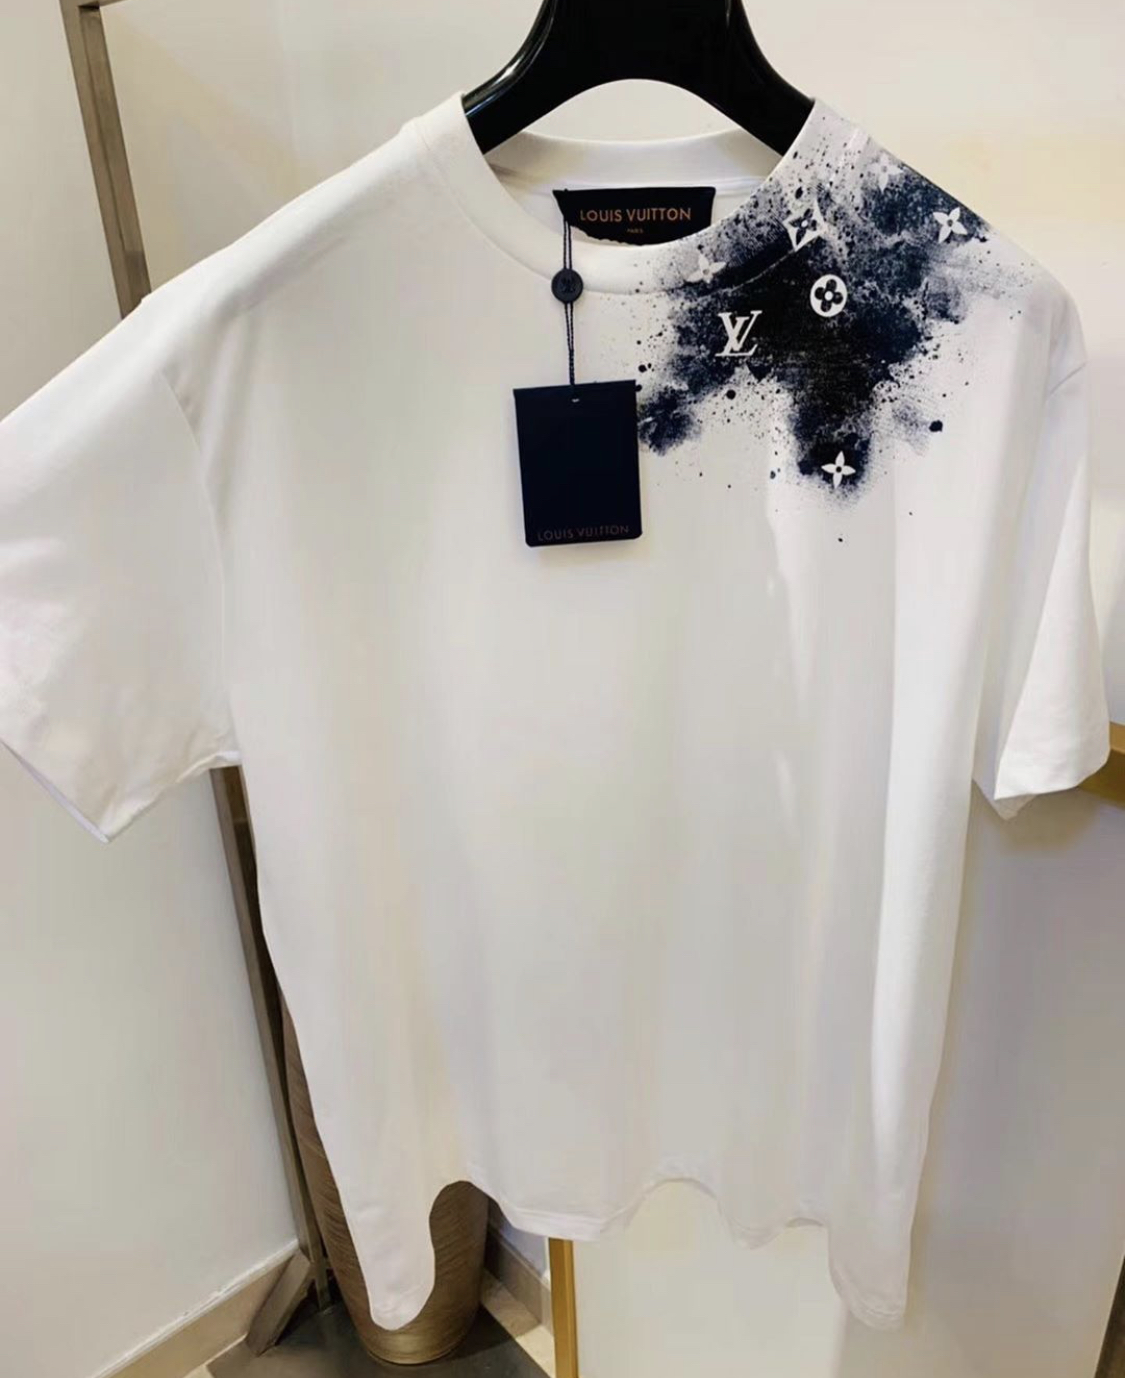 LOUIS VUITTON SPECIAL COLLECTION T-SHIRT